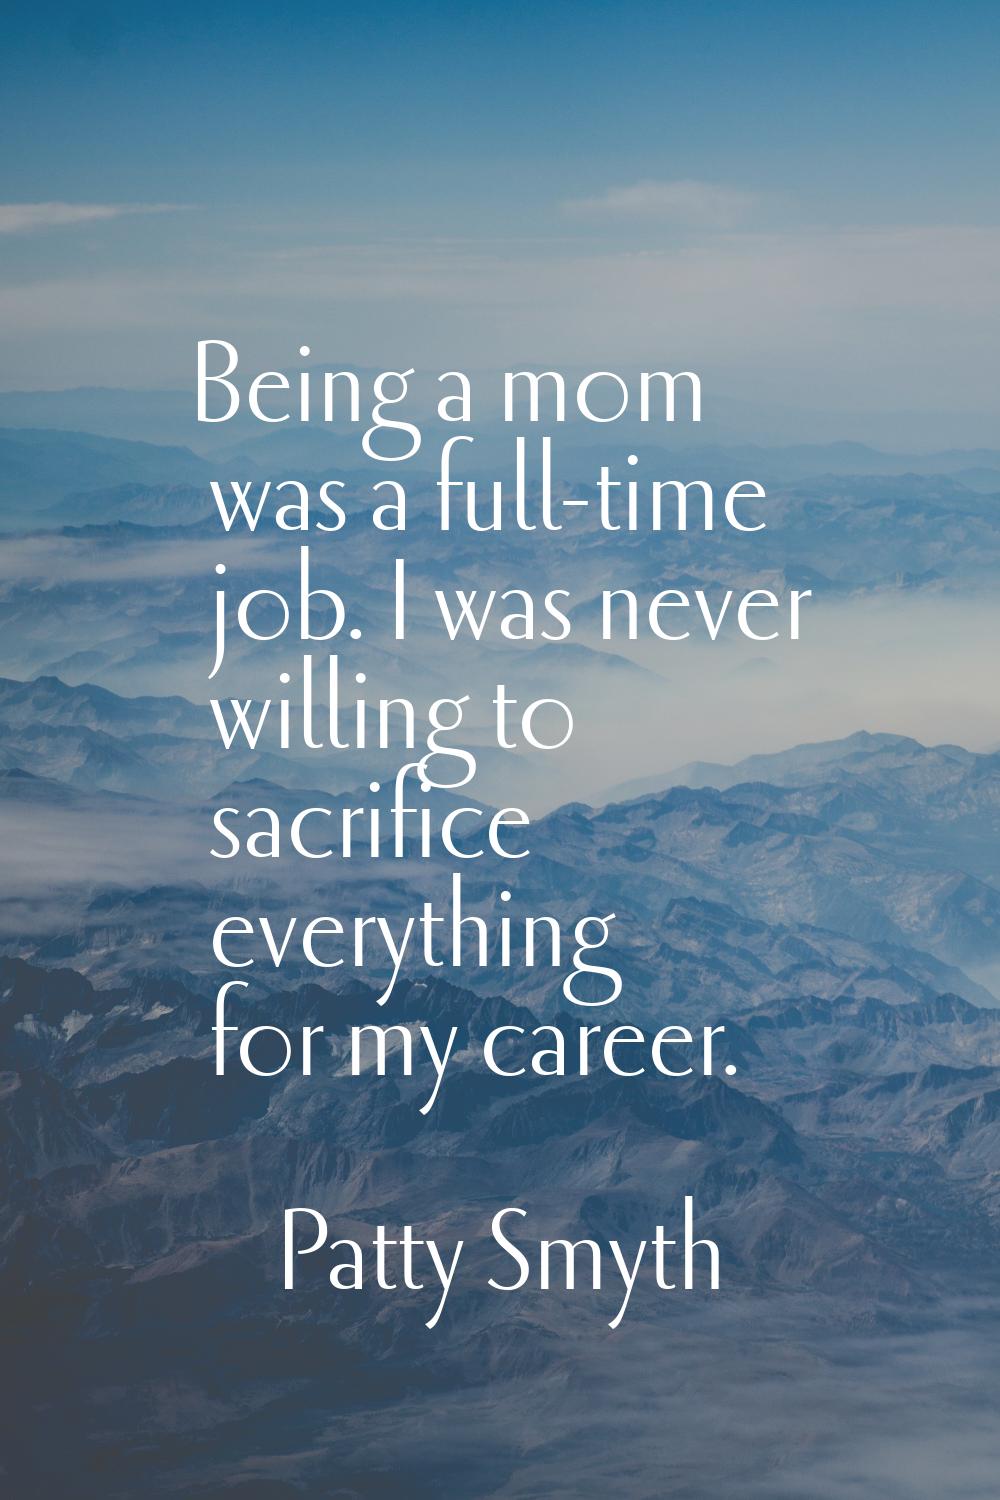 Being a mom was a full-time job. I was never willing to sacrifice everything for my career.